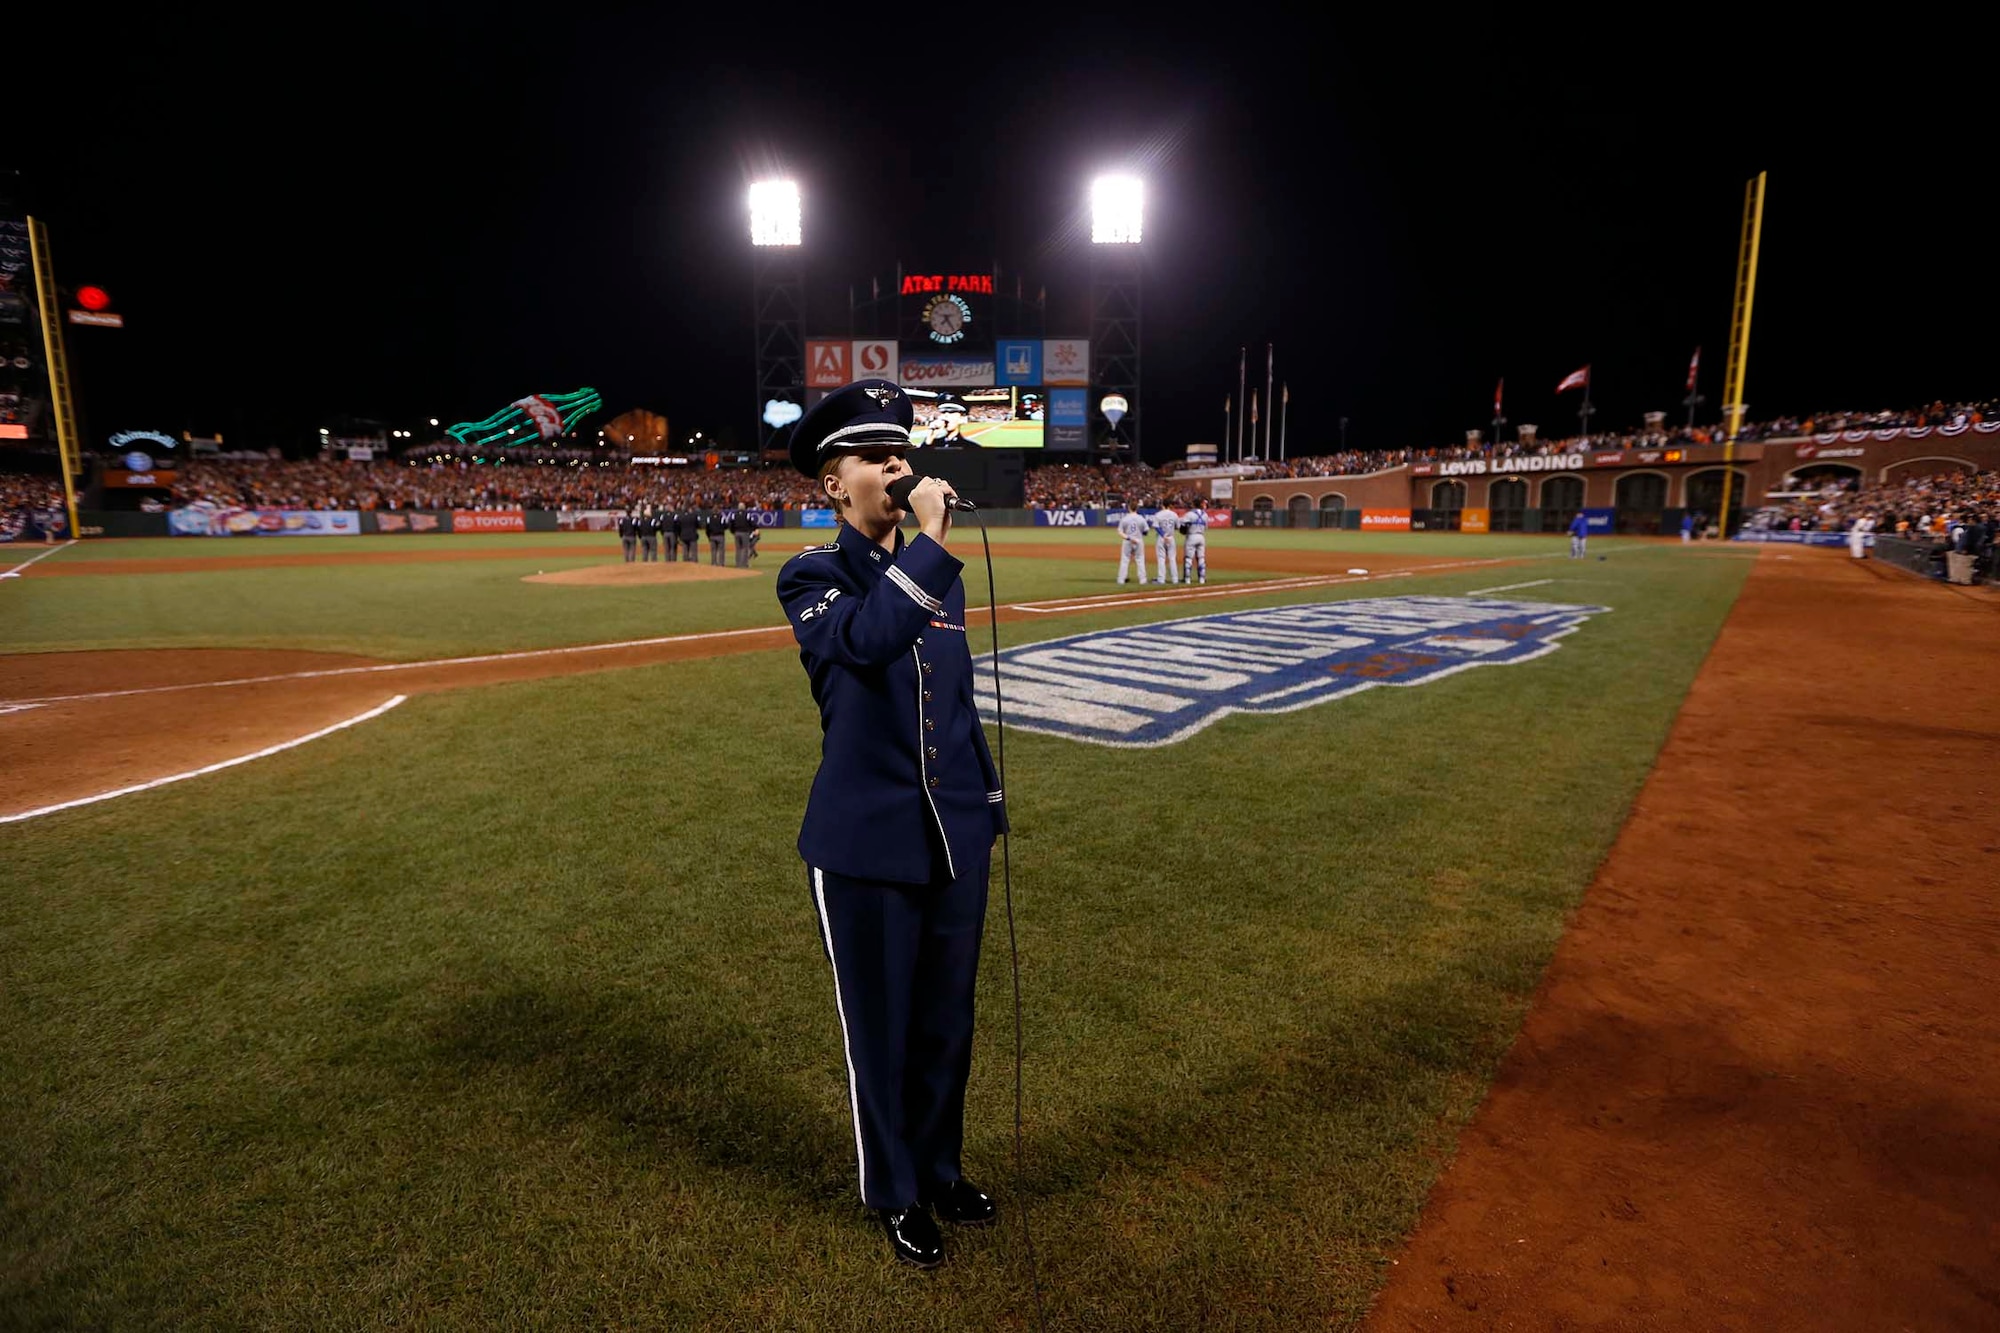 Airman 1st Class Michelle Doolittle sings "God Bless America" Oct. 26, 2014, during the seventh-inning stretch of Game 5, of the 2014 World Series. She represented the Airmen from Travis Air Force Base, California and the Air Force at the game. Doolittle is an Air Force Band of the Golden West vocalist. (Courtesy photo)